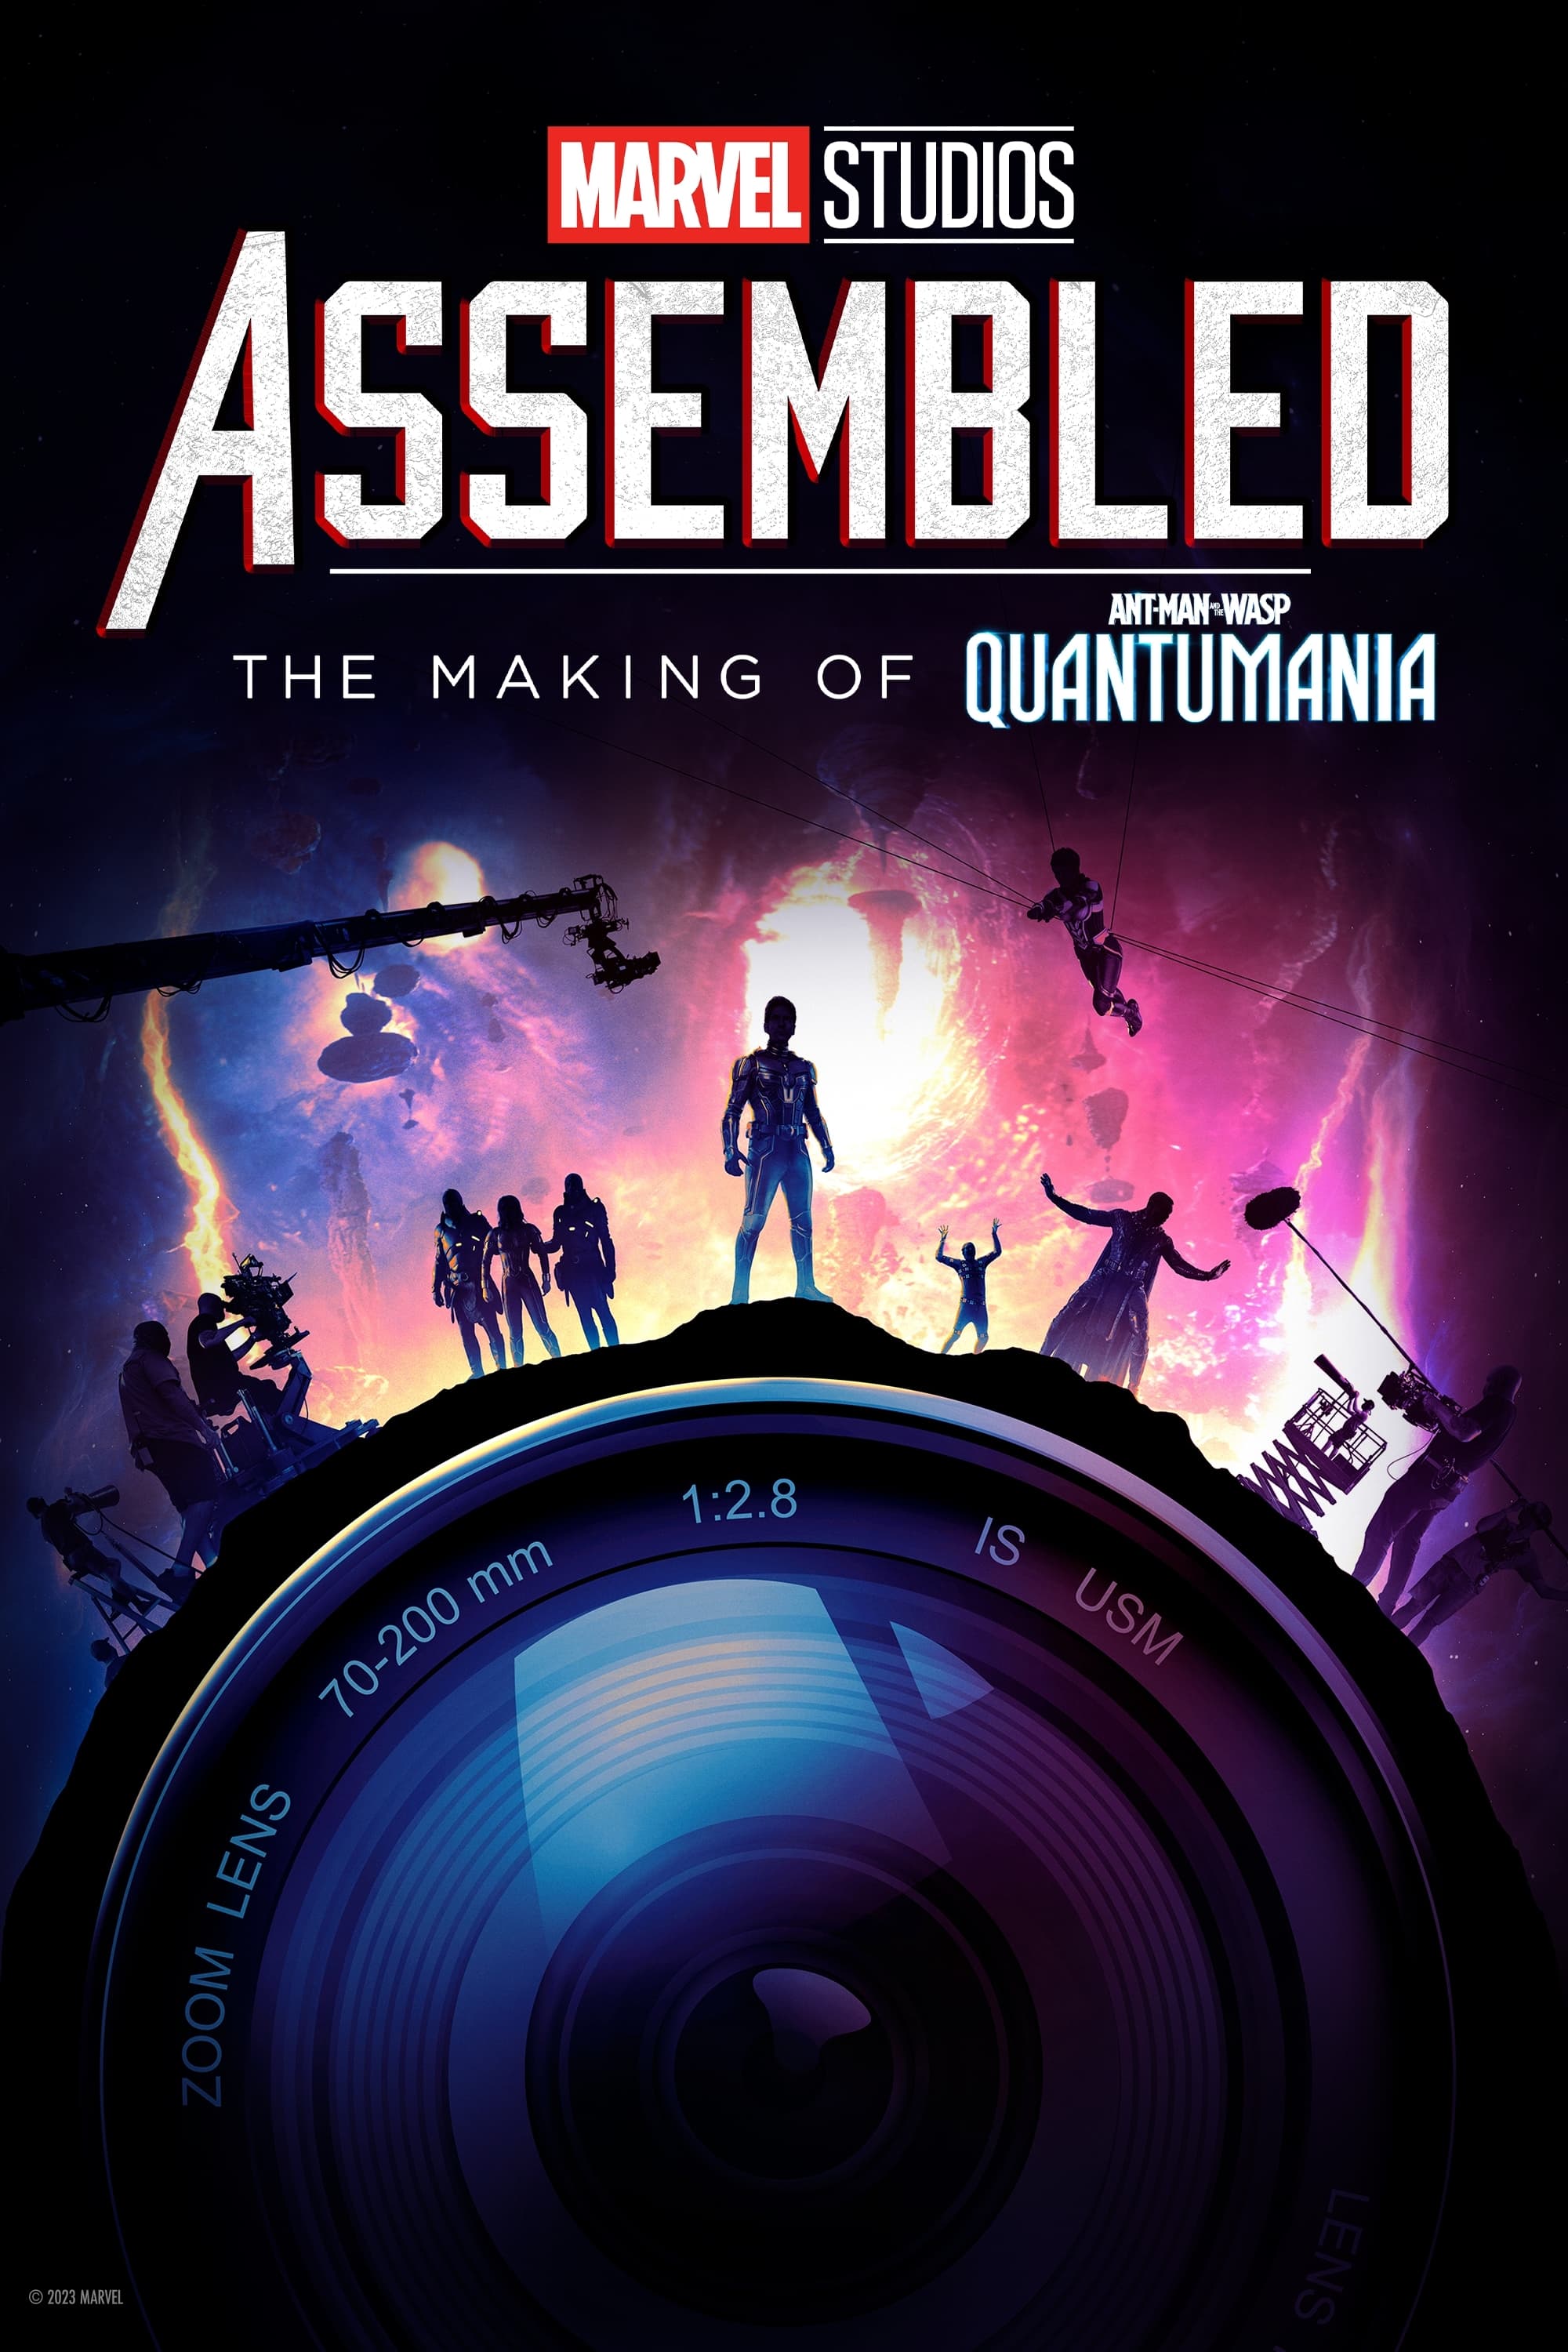 Marvel Studios Assembled: The Making of Ant-Man and the Wasp: Quantumania film